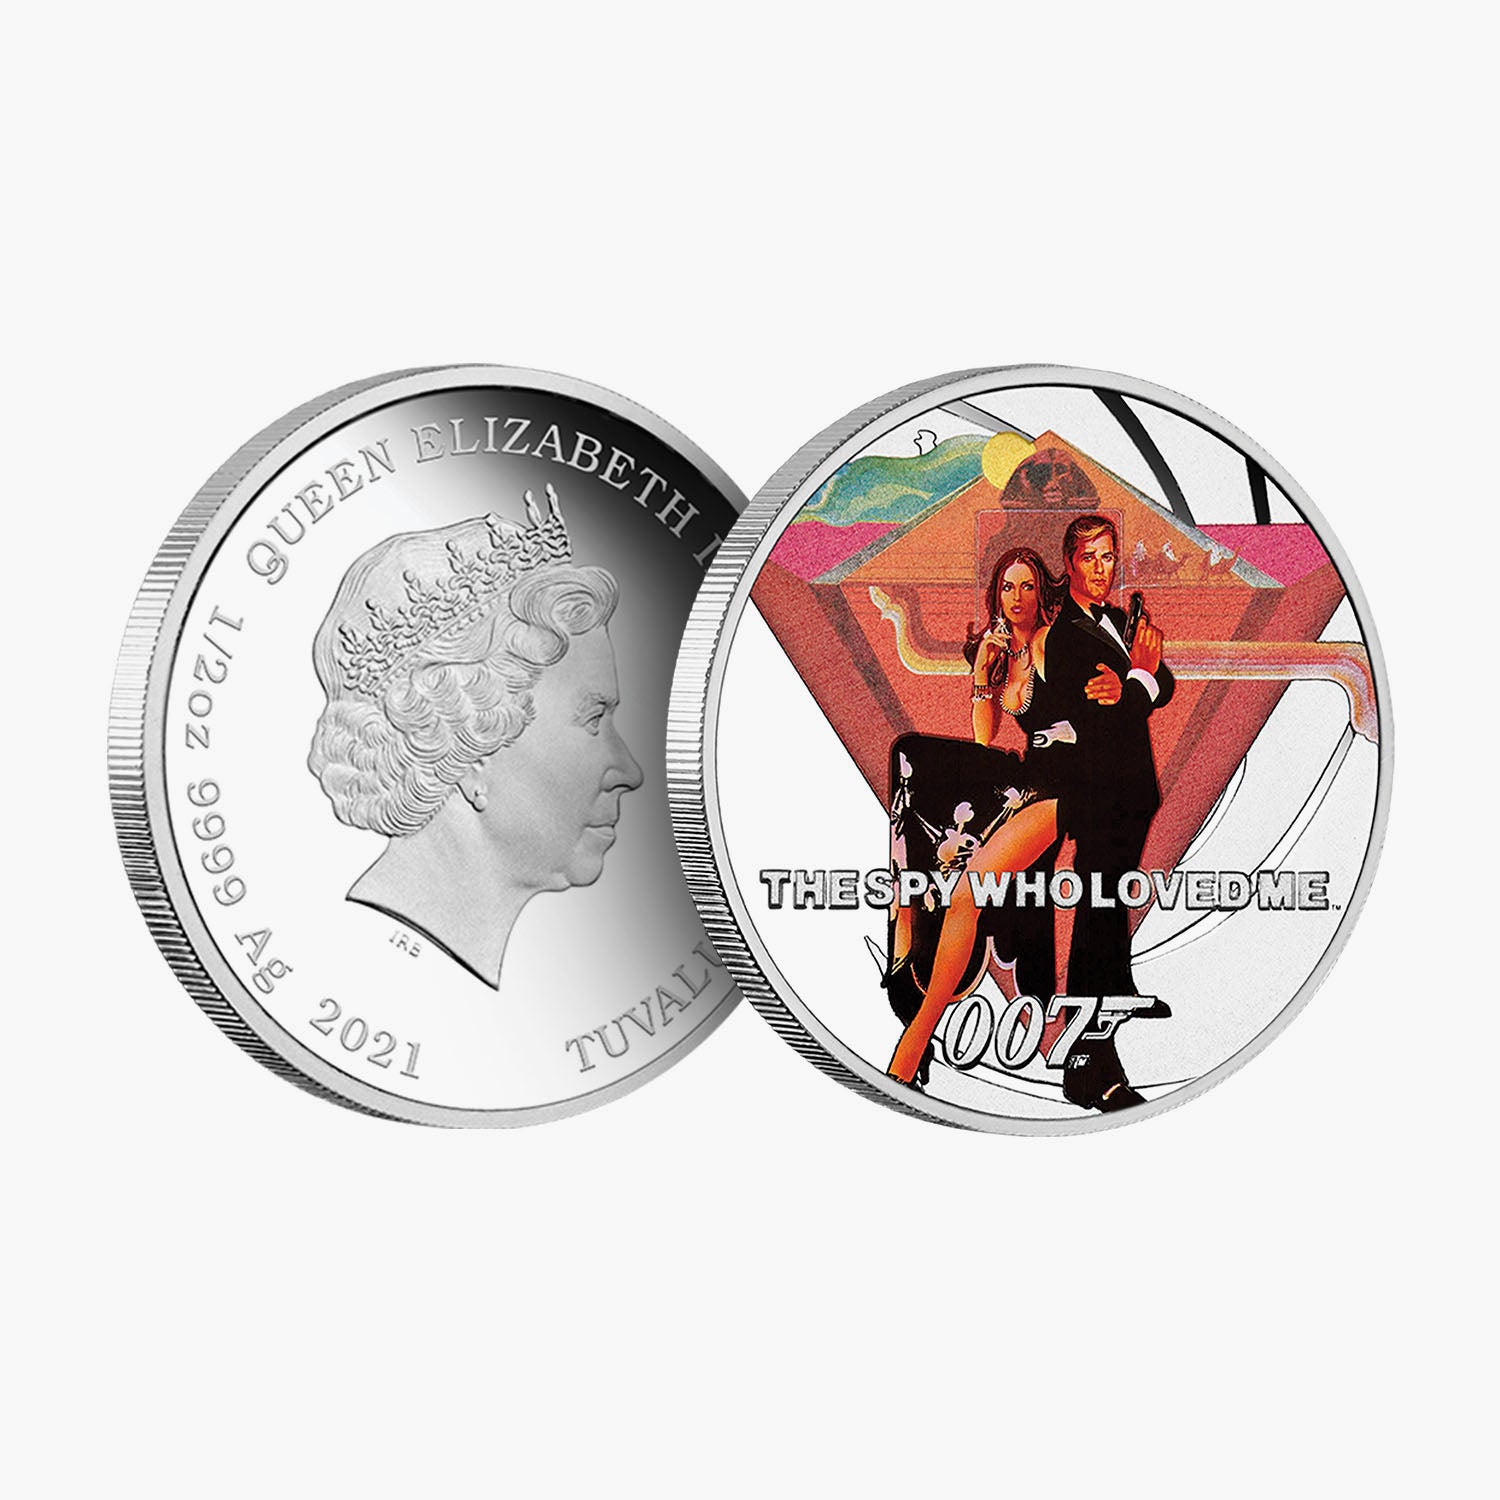 James Bond - The Spy Who Loved Me Solid Silver Movie Coin